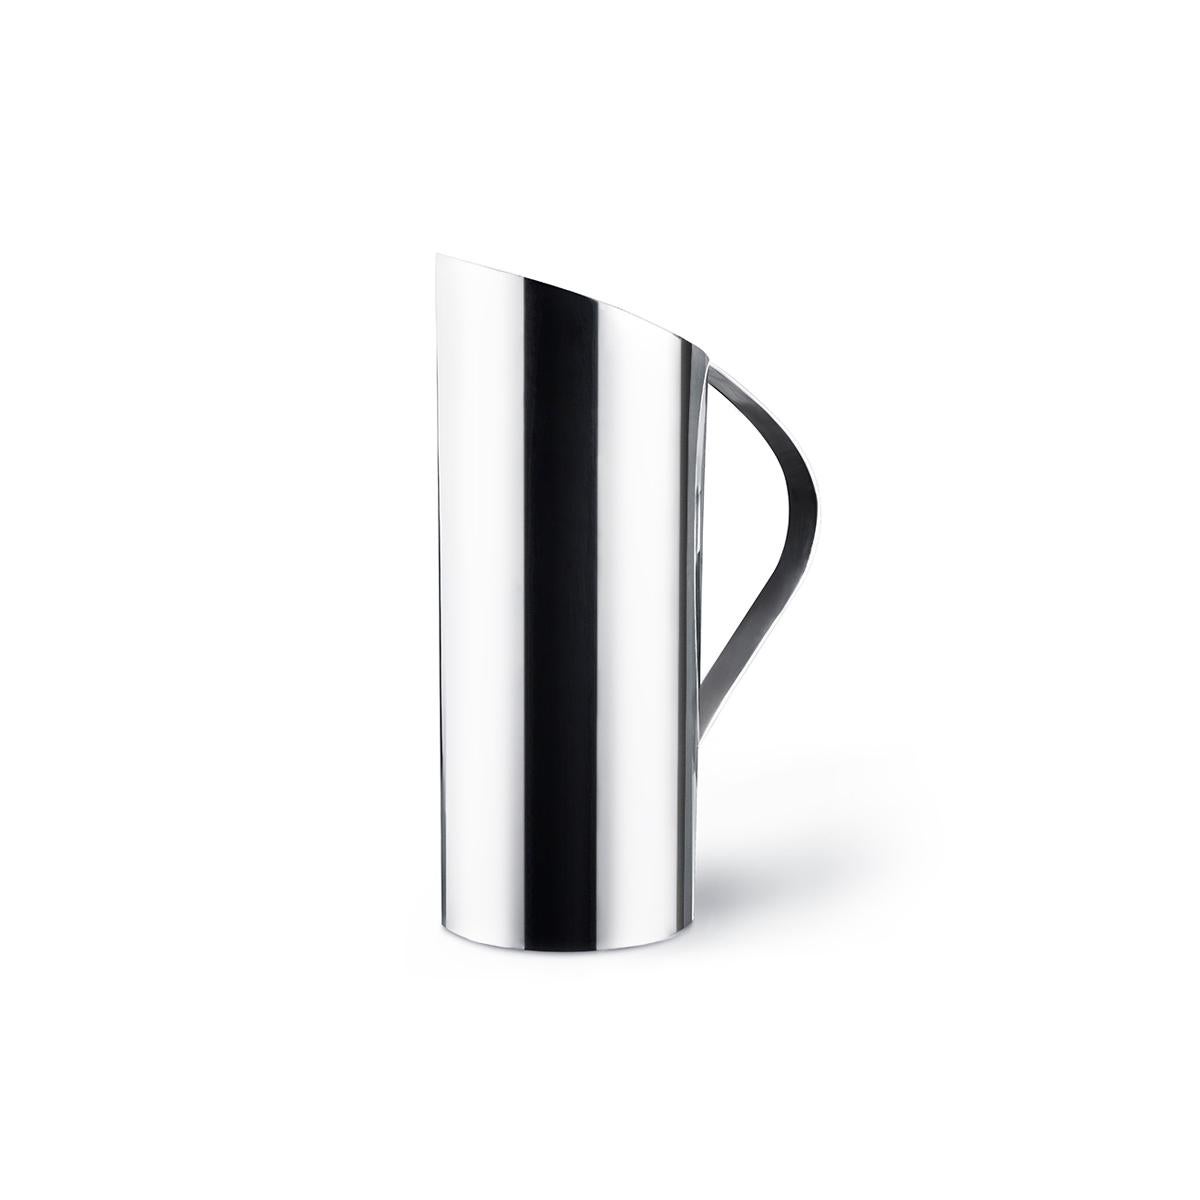 Afroditi is a stainless steel carafe designed by Afroditi Krassa. The silver finishing plays with the light of the room that emphasizes the elegant curves and the timeless silhouette. Afroditi is also available with a silver-plated finishing.